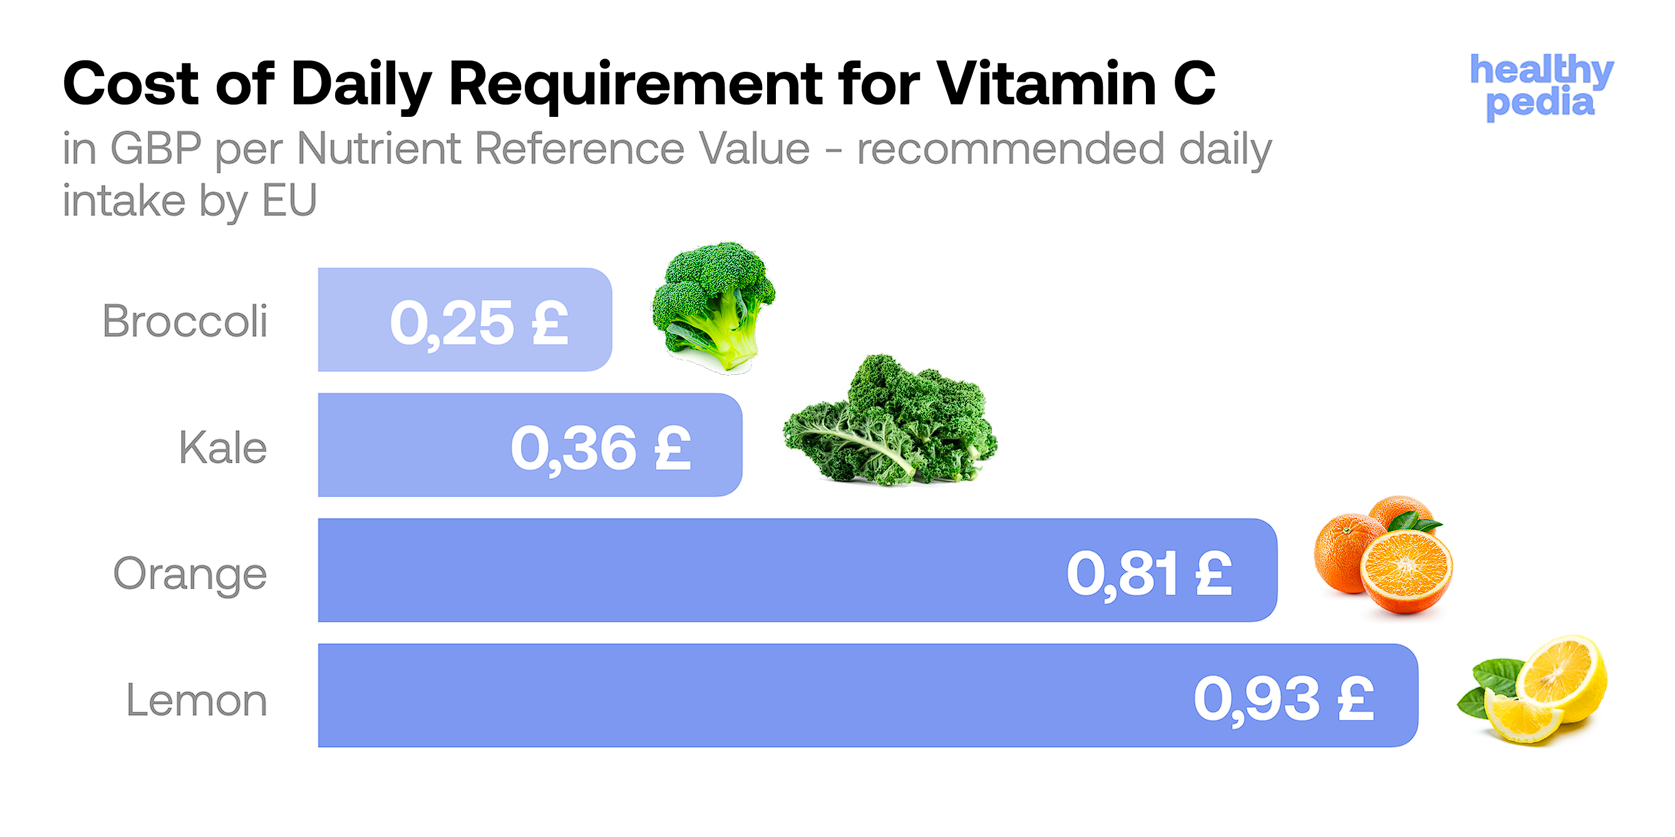 Cost of Daily Requirement for Vitamin C, stats